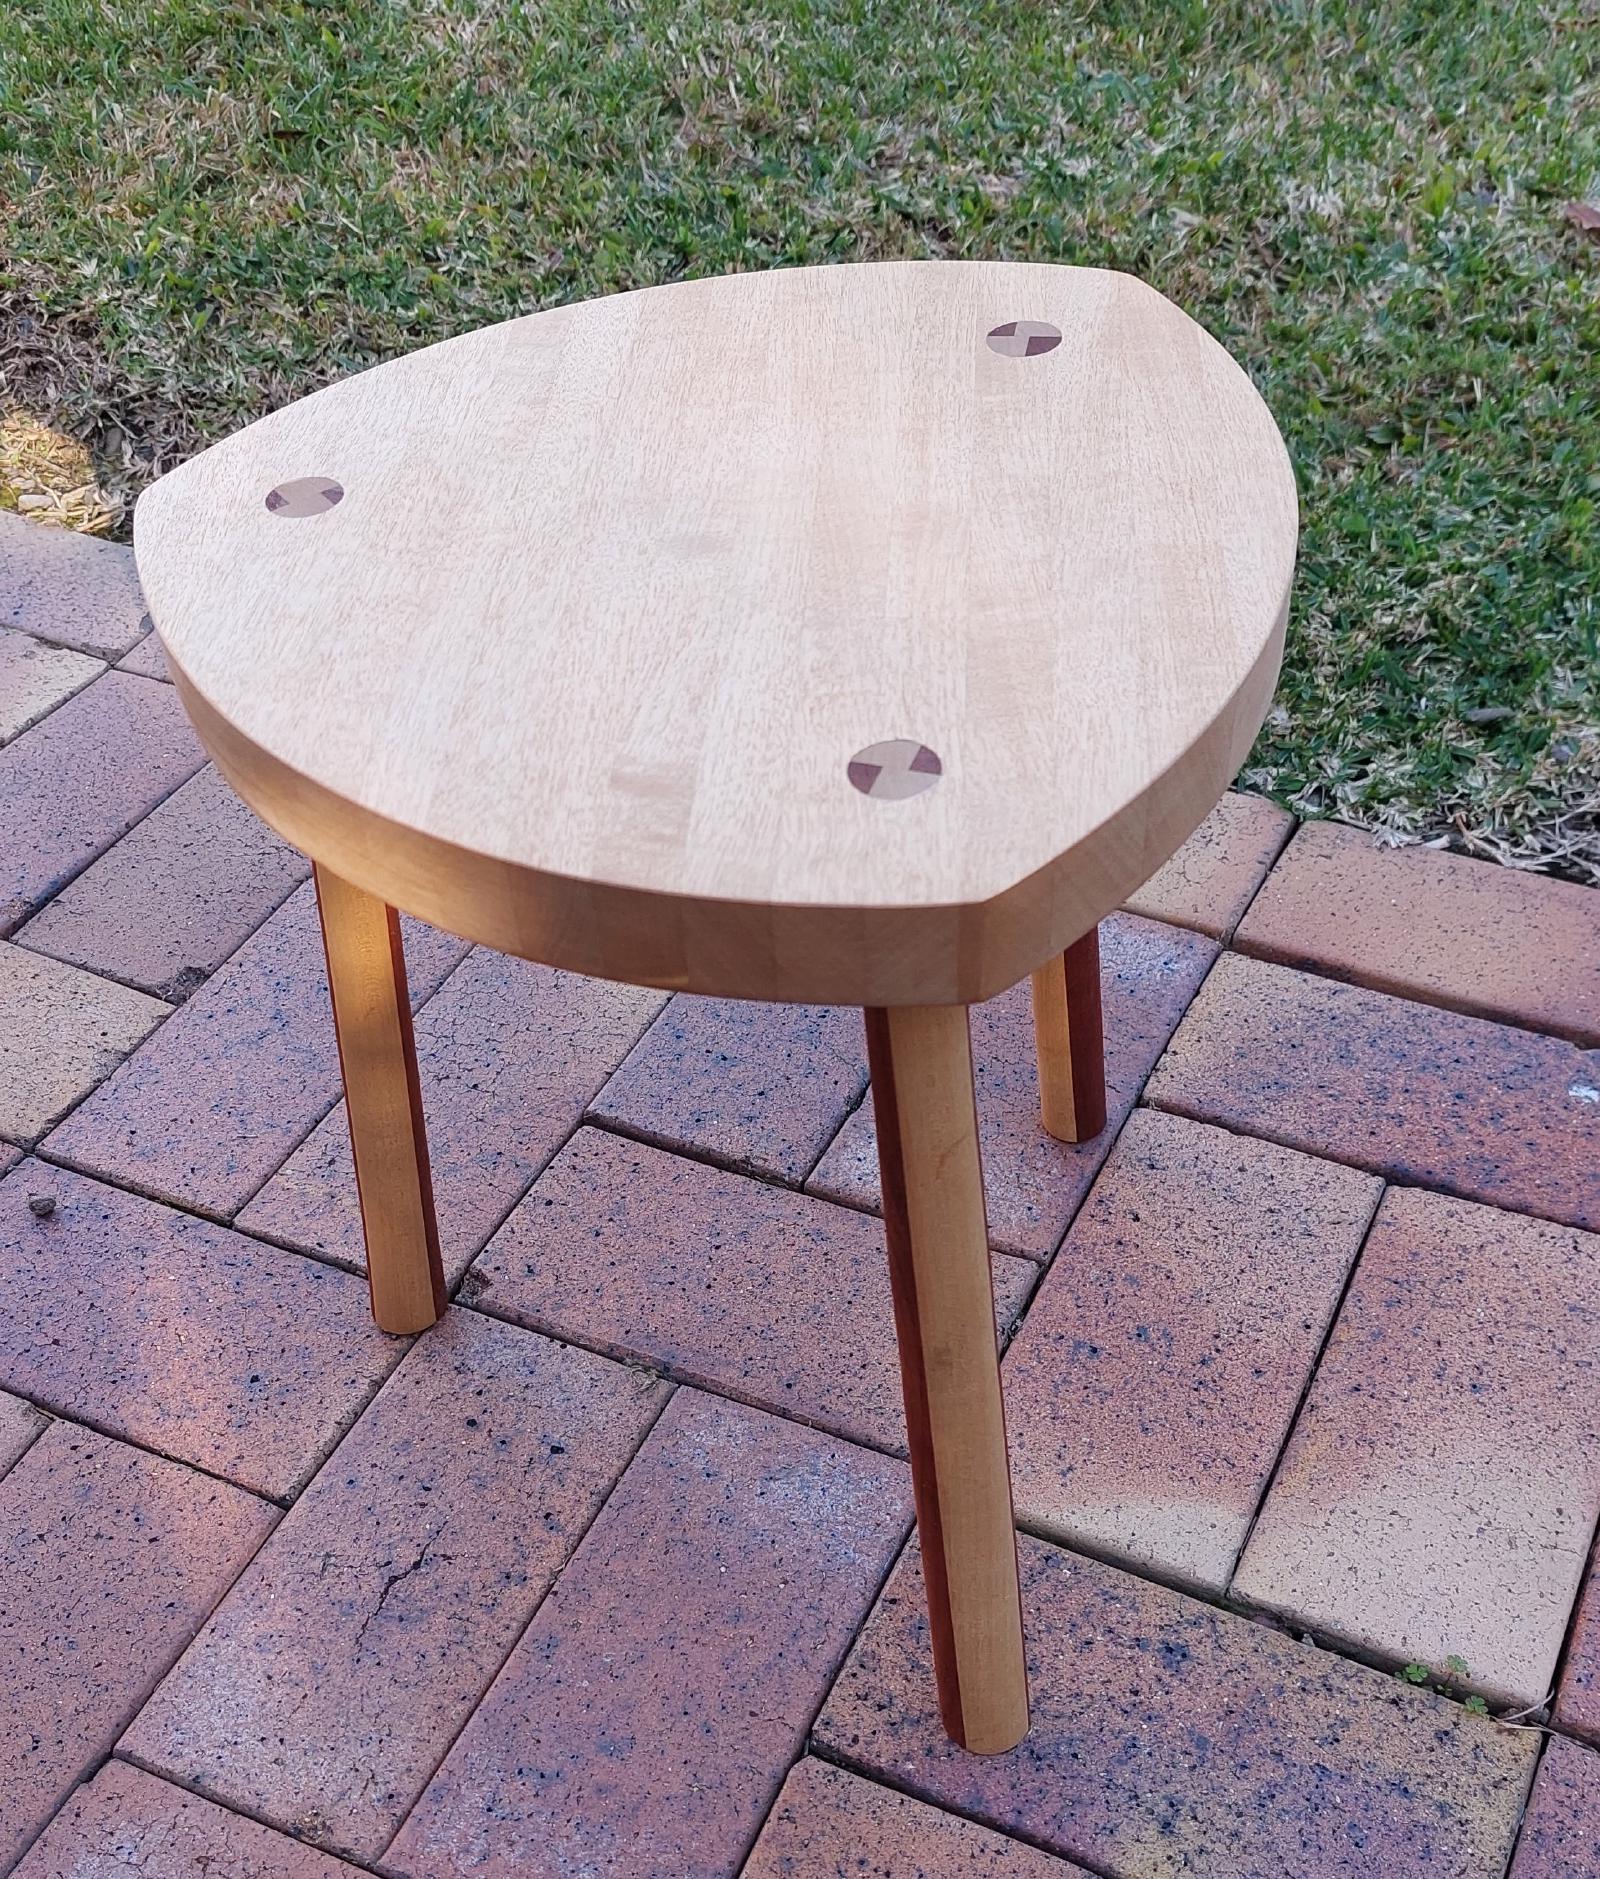 2022 - Small Stool - QLD White Beech and Red Cedar